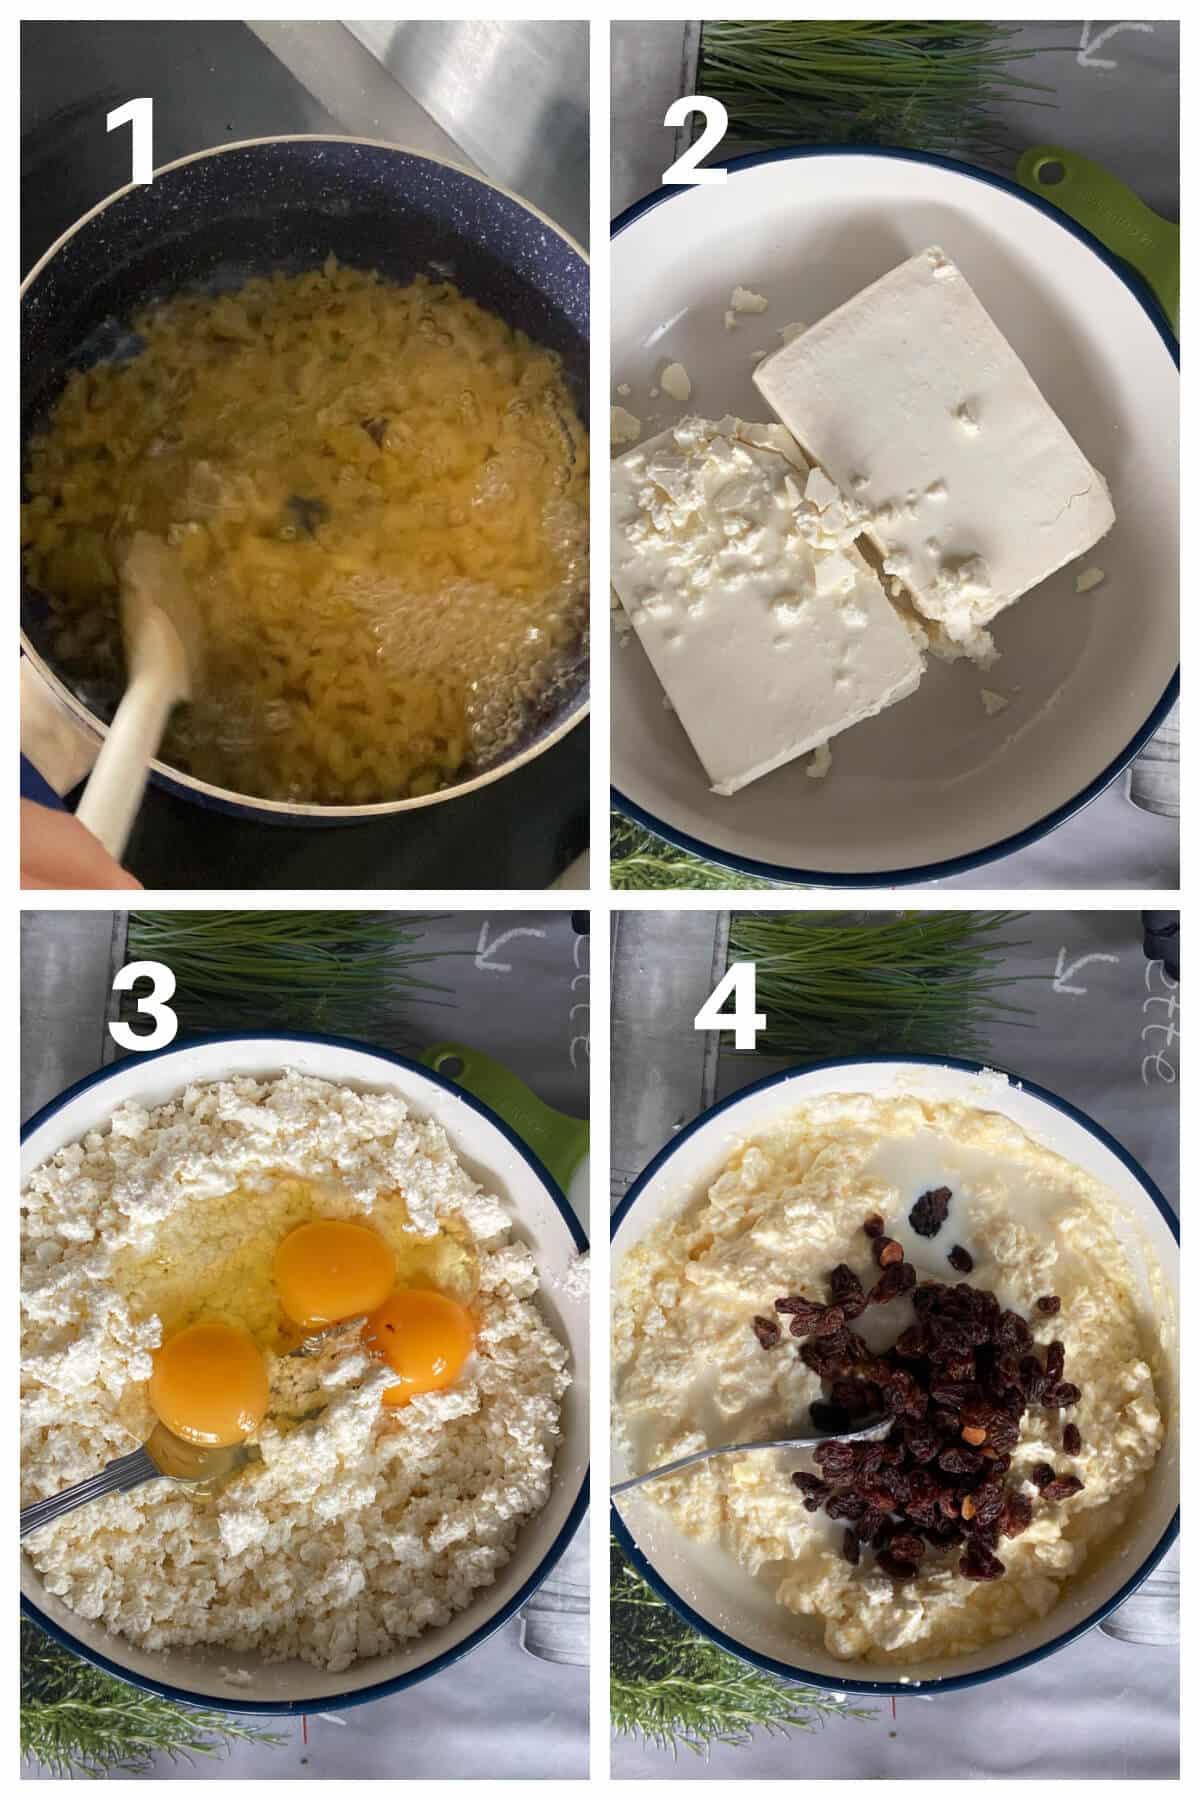 Collage of 4 photos to show how to make macaroni pudding.